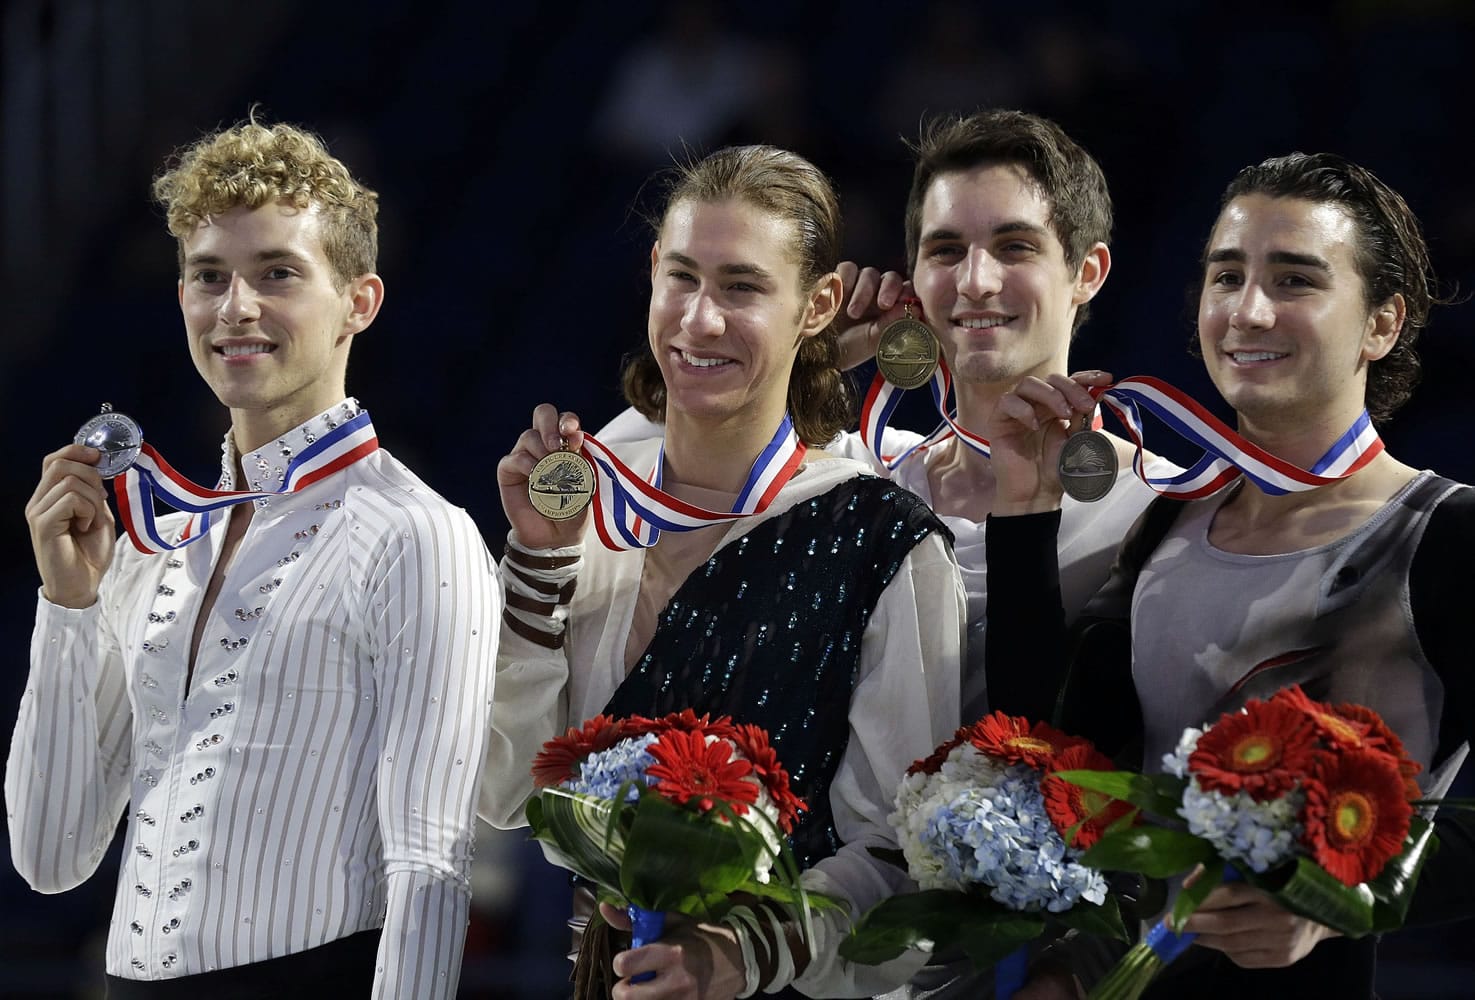 Top winners of the men's competition from left, Adam Rippon, second place; Jason Brown, first place; Joshua Farris, third place and Max Aaron, fourth place, hold their medals during the awards ceremony in the U.S. Figure Skating Championships in Greensboro, N.C., Sunday, Jan. 25, 2015.